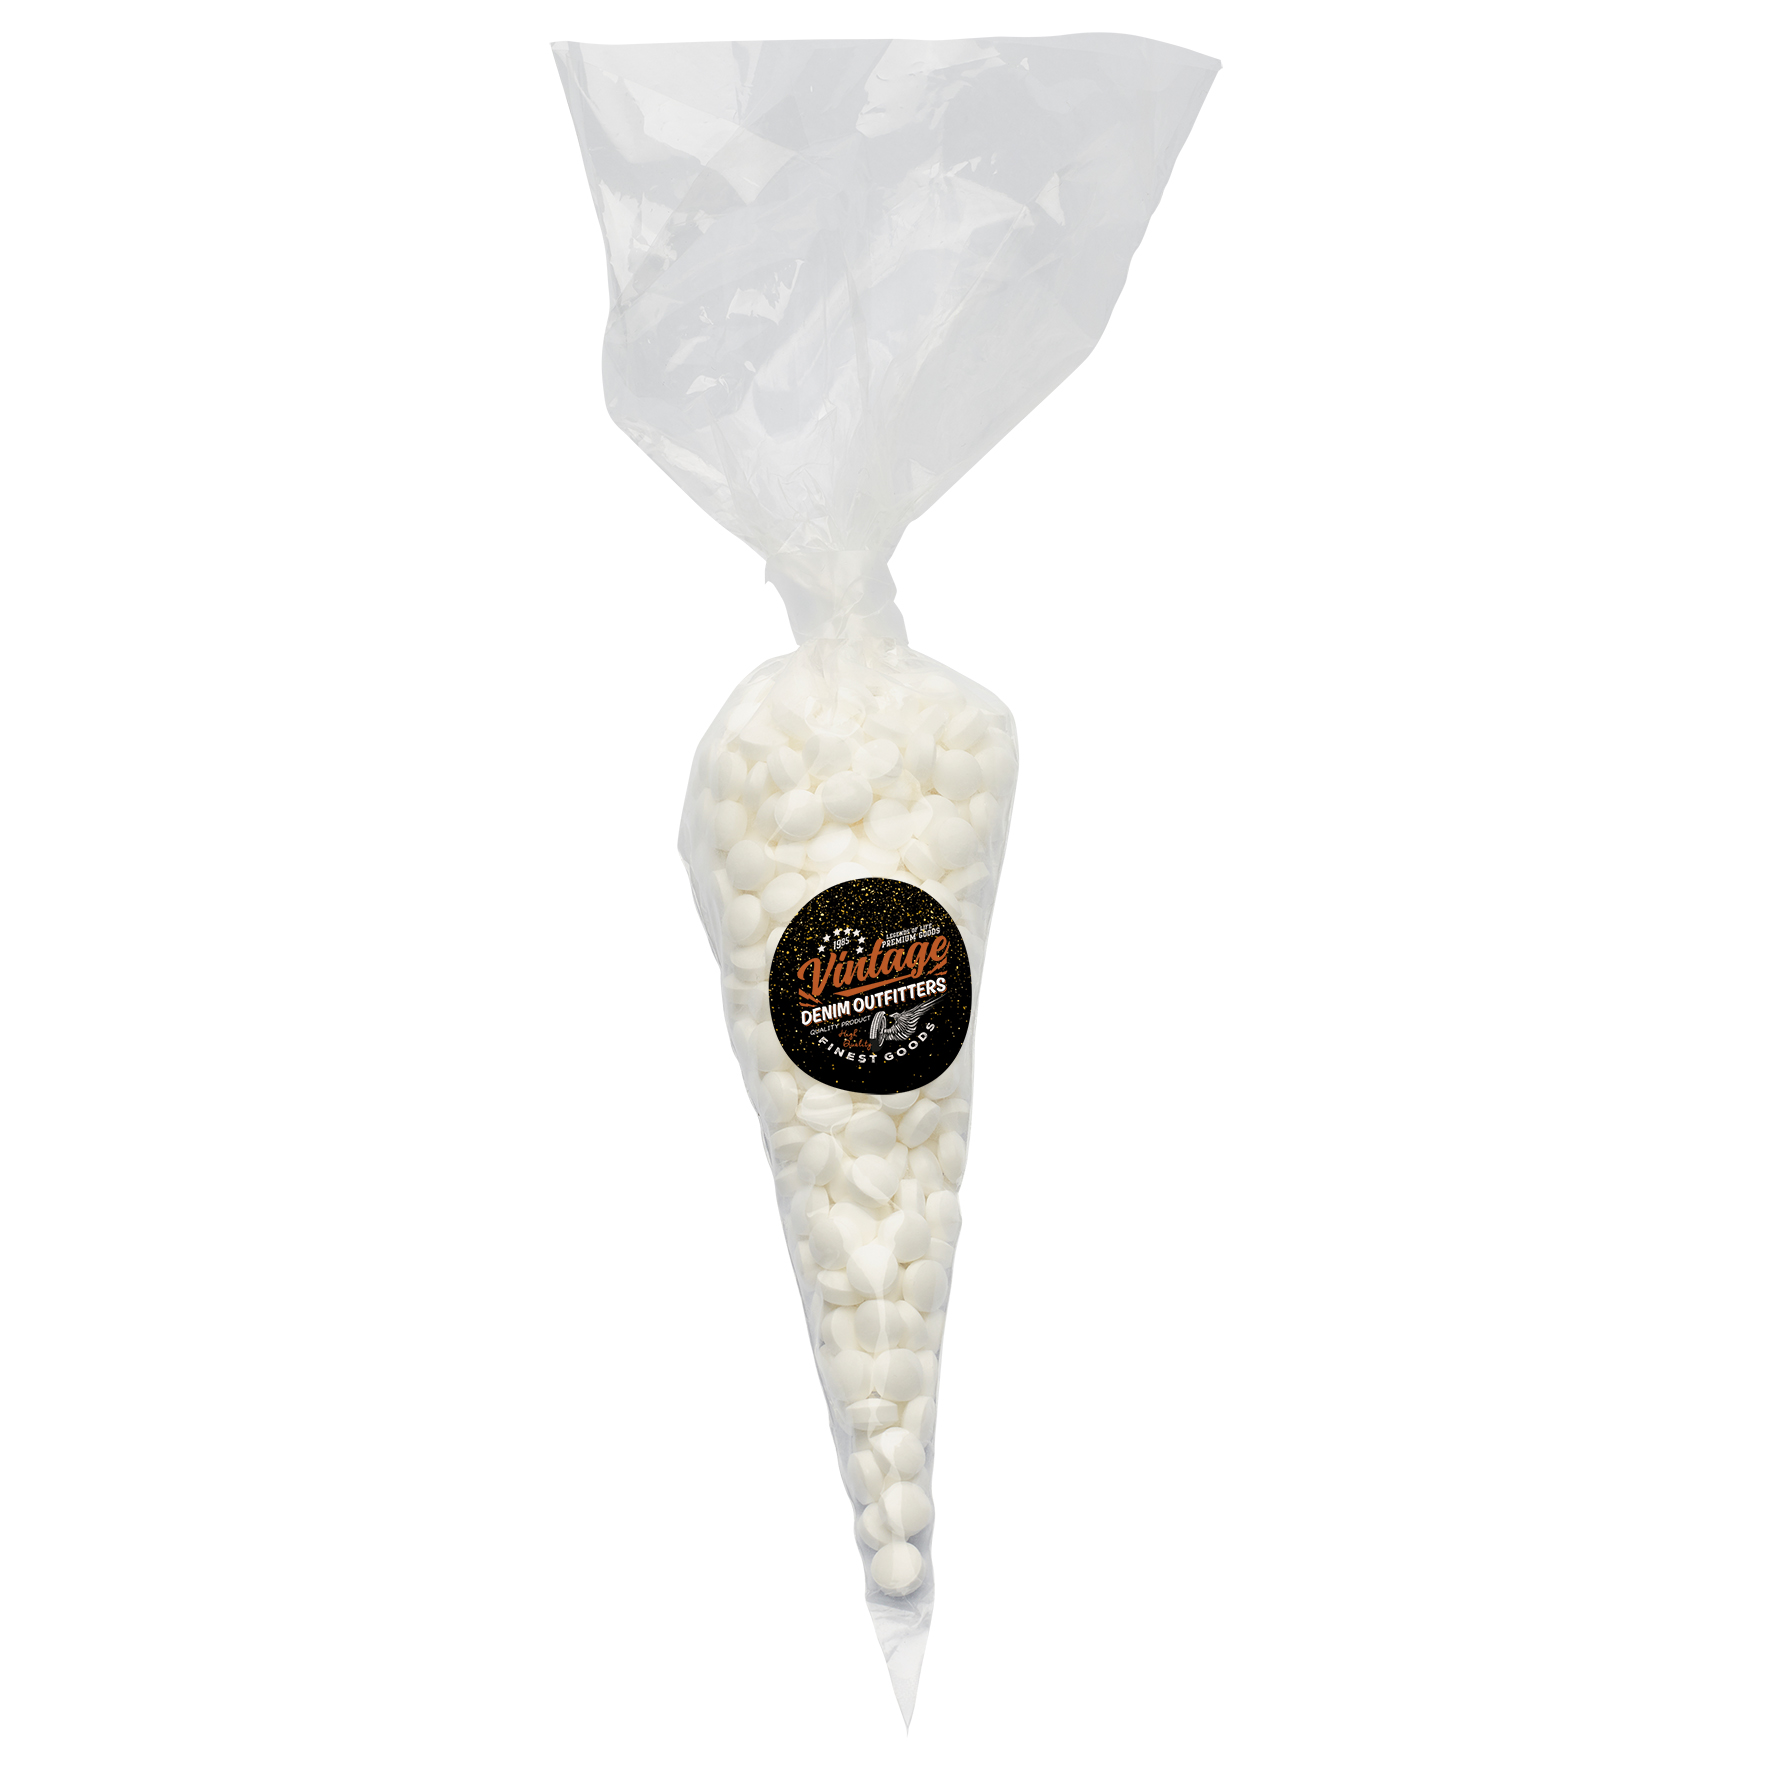 c 0604dmi 00 02 - Sweet cones with extra strong mints (240g)